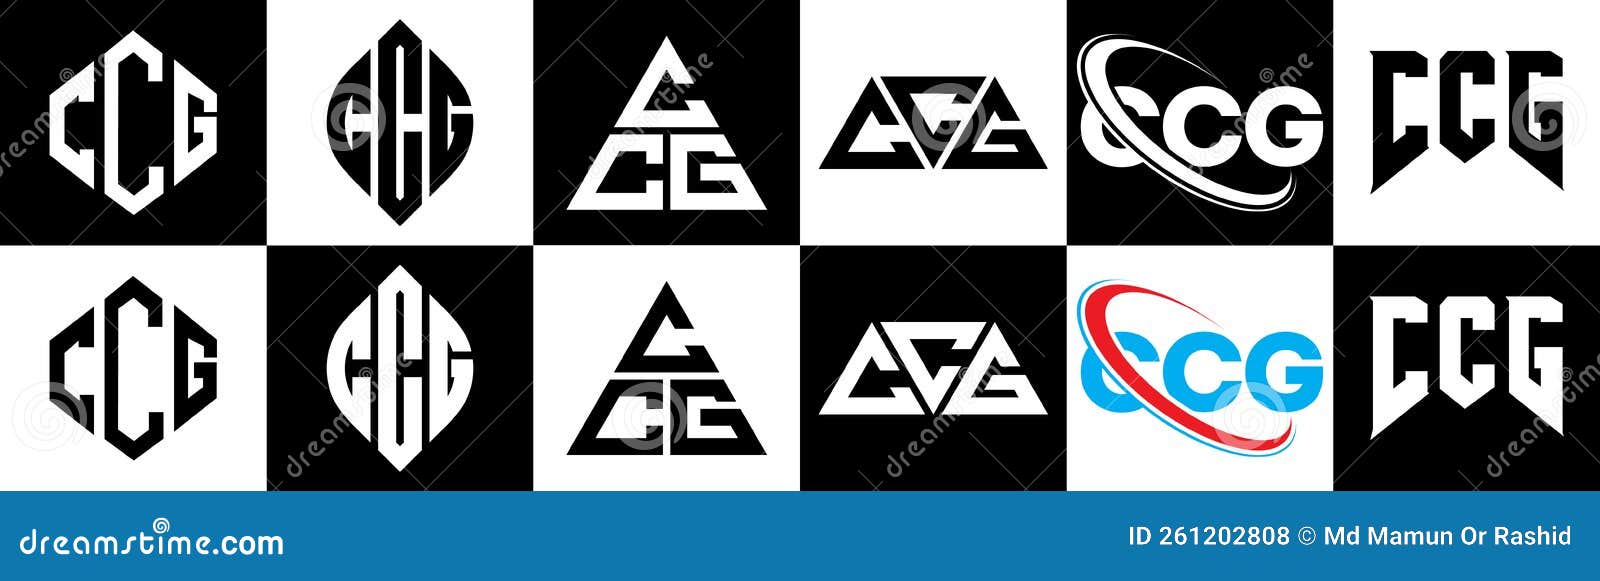 ccg letter logo  in six style. ccg polygon, circle, triangle, hexagon, flat and simple style with black and white color